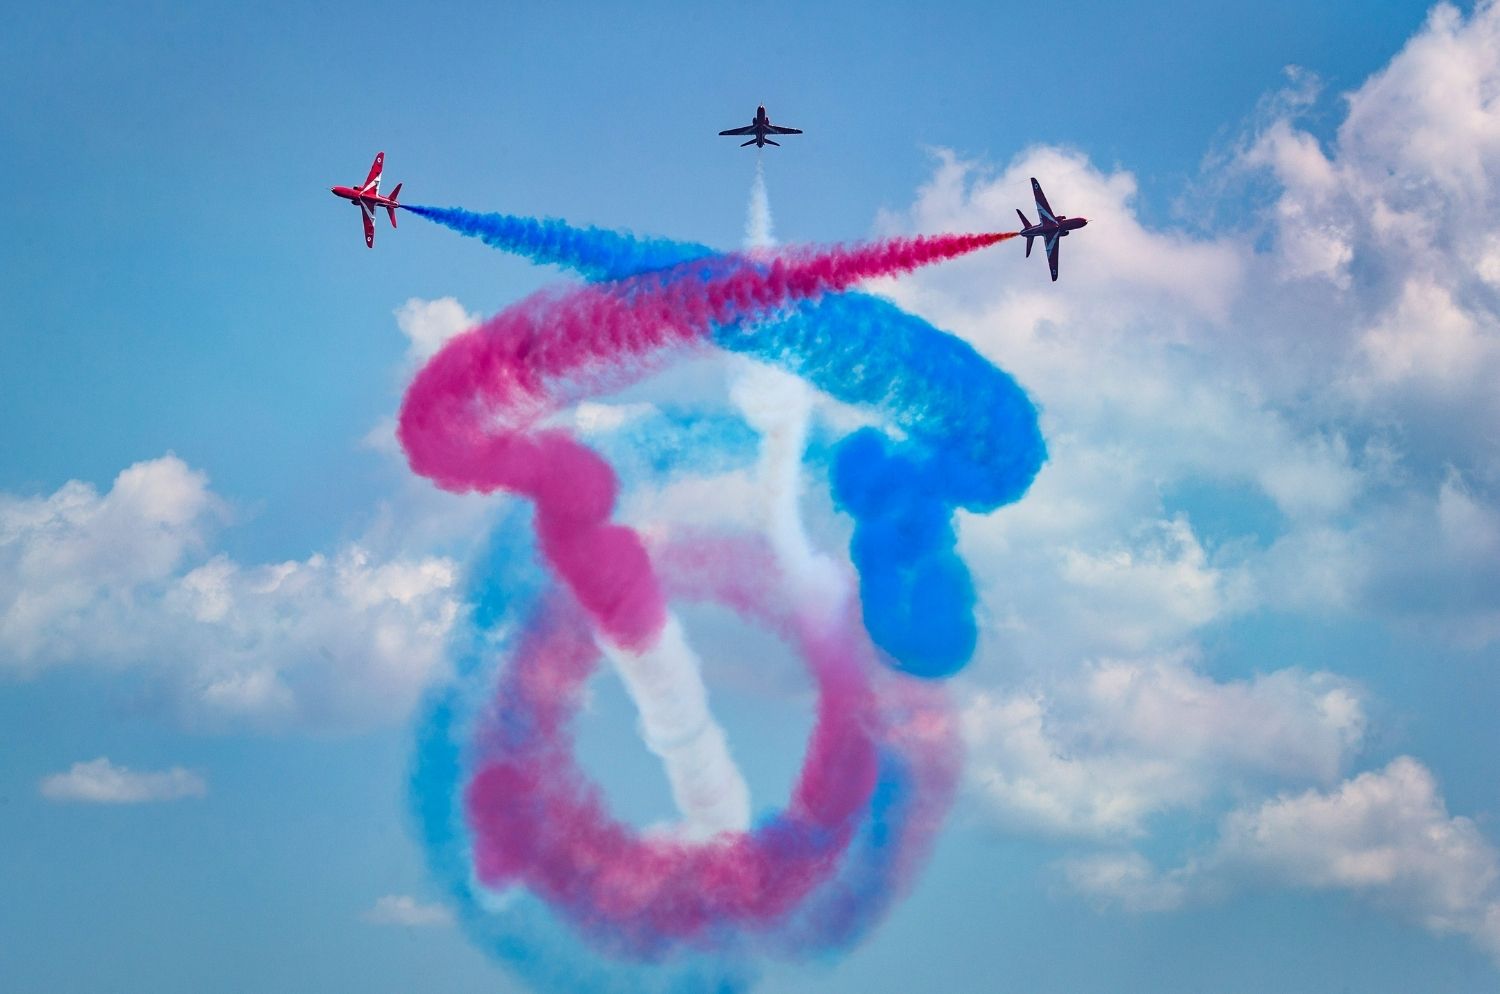 T1 Hawks used by the RAF’s Aerobatics Team, the Red Arrows. Picture shows Red Arrows Display.